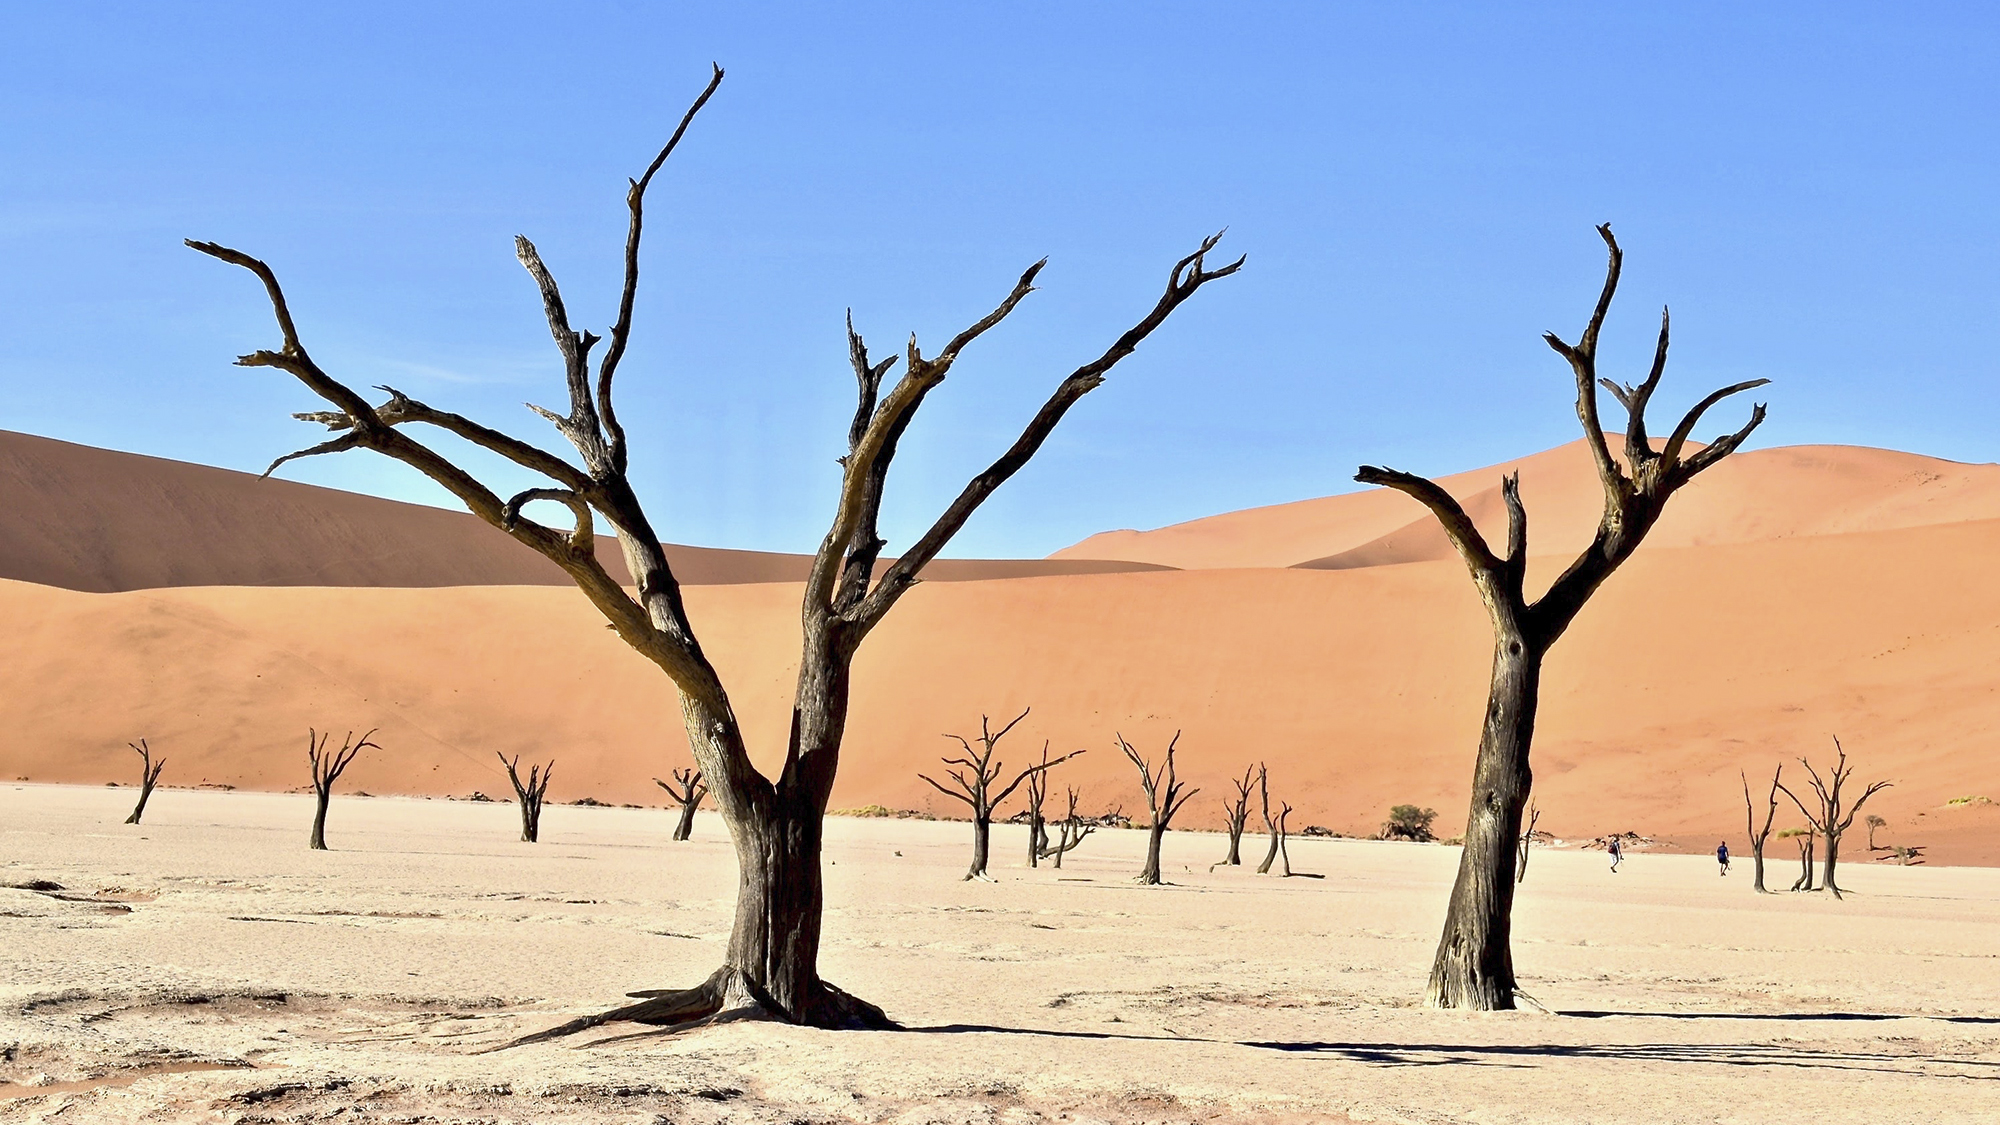 Increases in aridity such as those expected from climate change could dramatically alter and even endanger ecosystems in arid areas of our planet. | Picture by Parsing Eye from Unsplash.